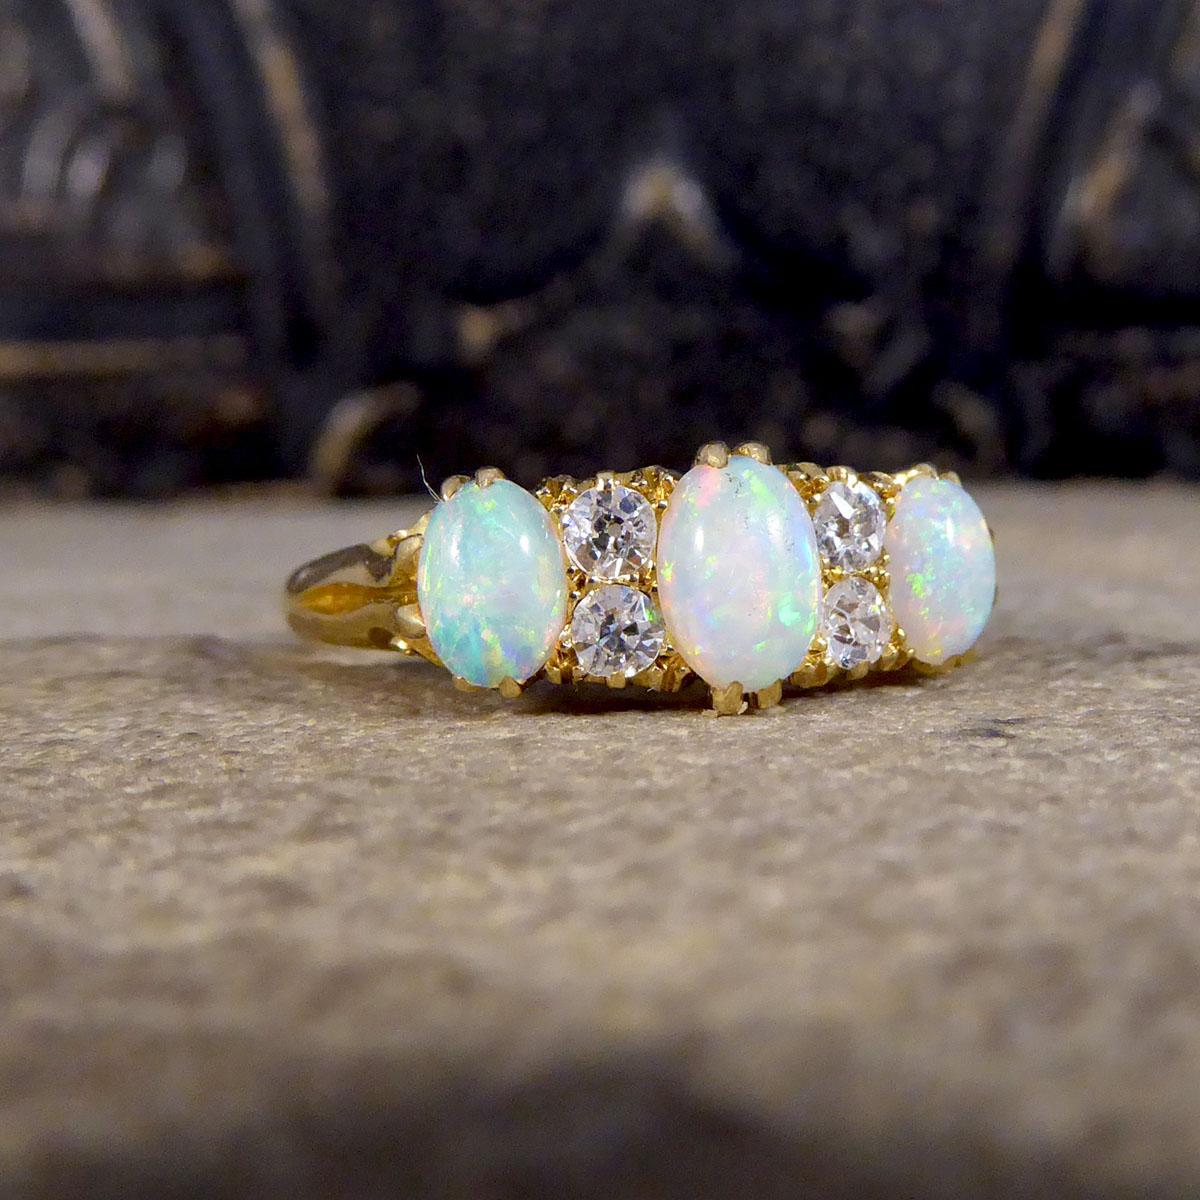 The most vibrant Opals feature in this gorgeous antique ring hand crafted in the Late Victorian era. There are three very colourful Opals in this ring, with the centre Opal being slightly larger and two Diamond spacers in-between each stone. As well